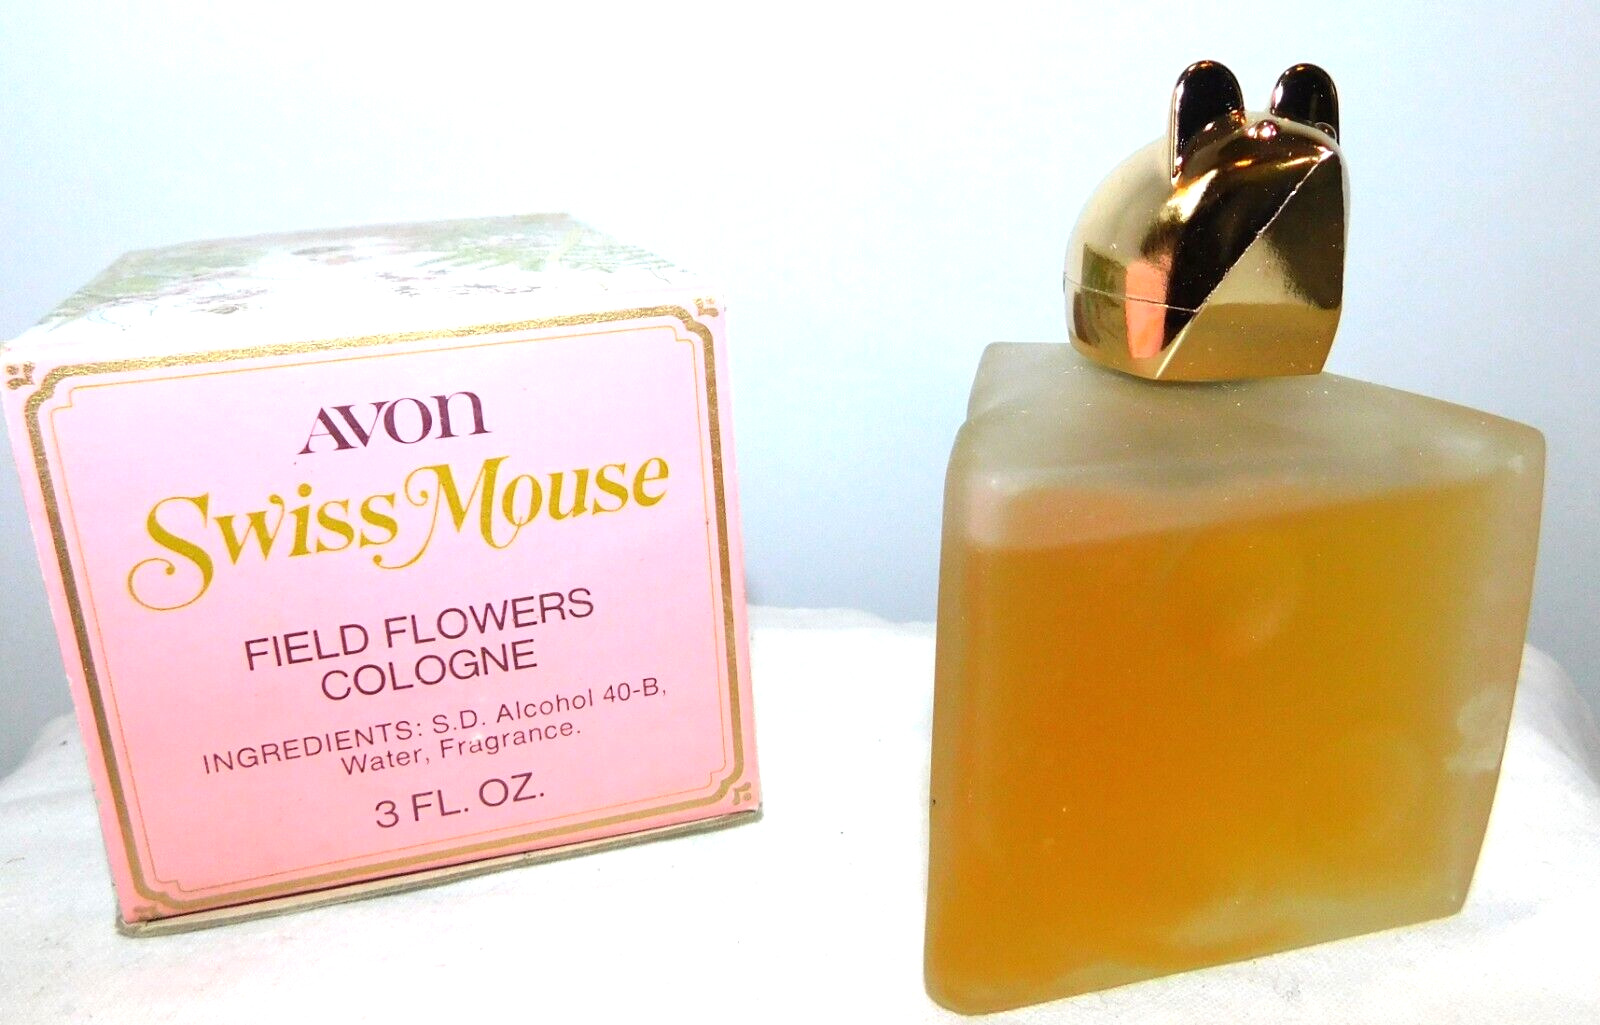 VTG AVON Swiss Mouse Field of Flowers Cologne Decanter  3 oz almost full w/Box